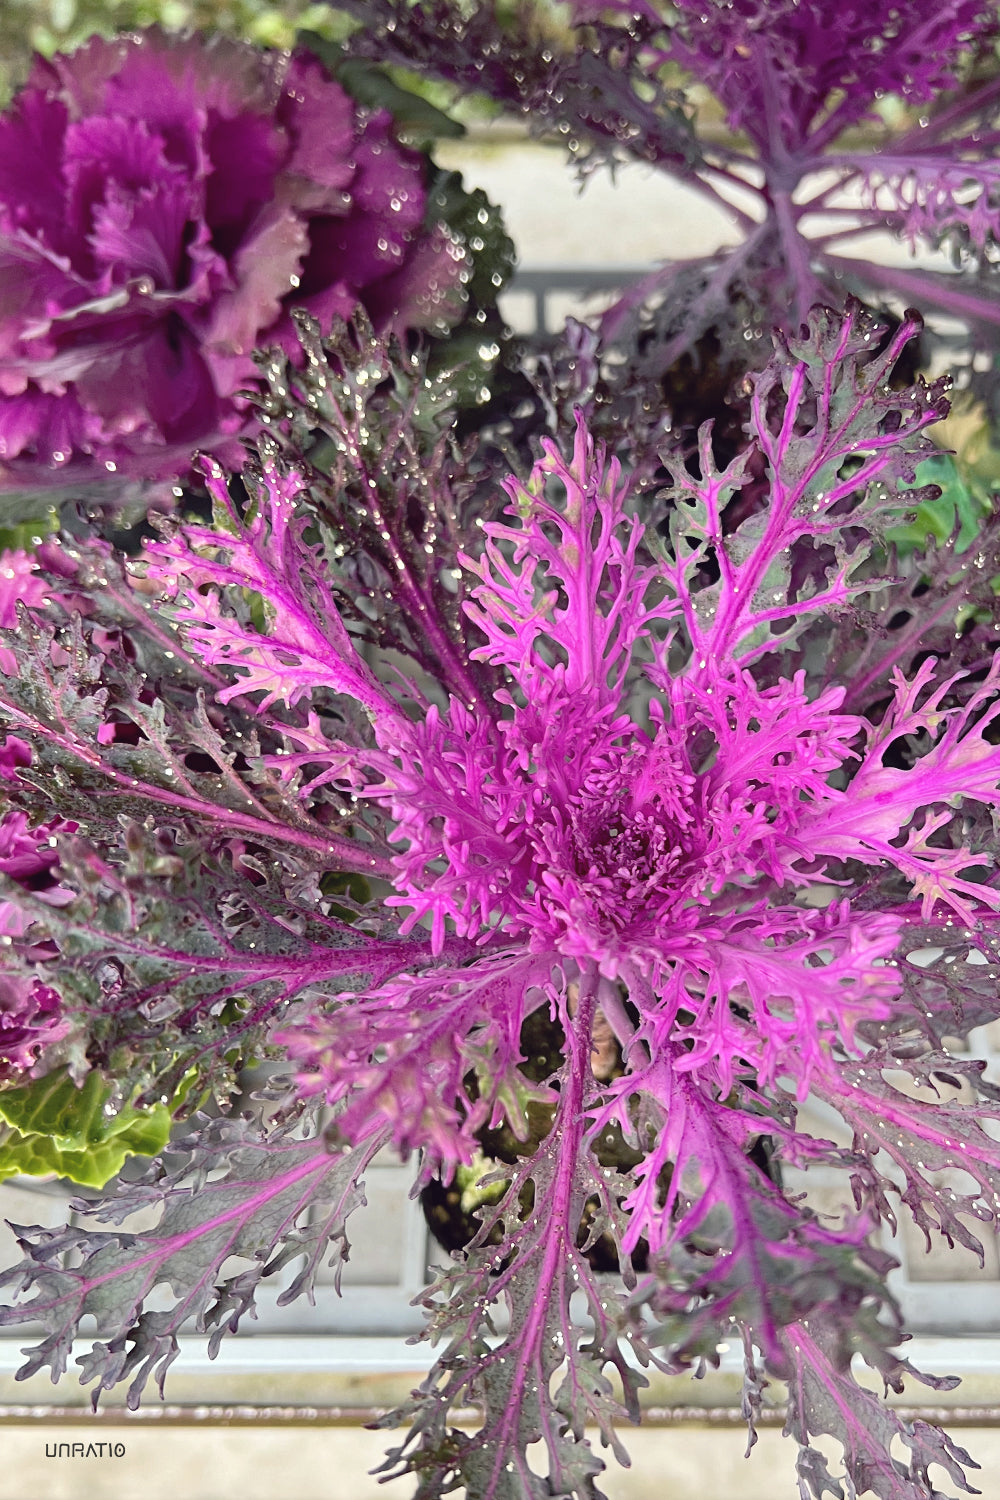 Vivid purple ornamental kale glistening with water droplets, showcasing intricate leaf patterns against a blurred garden background.